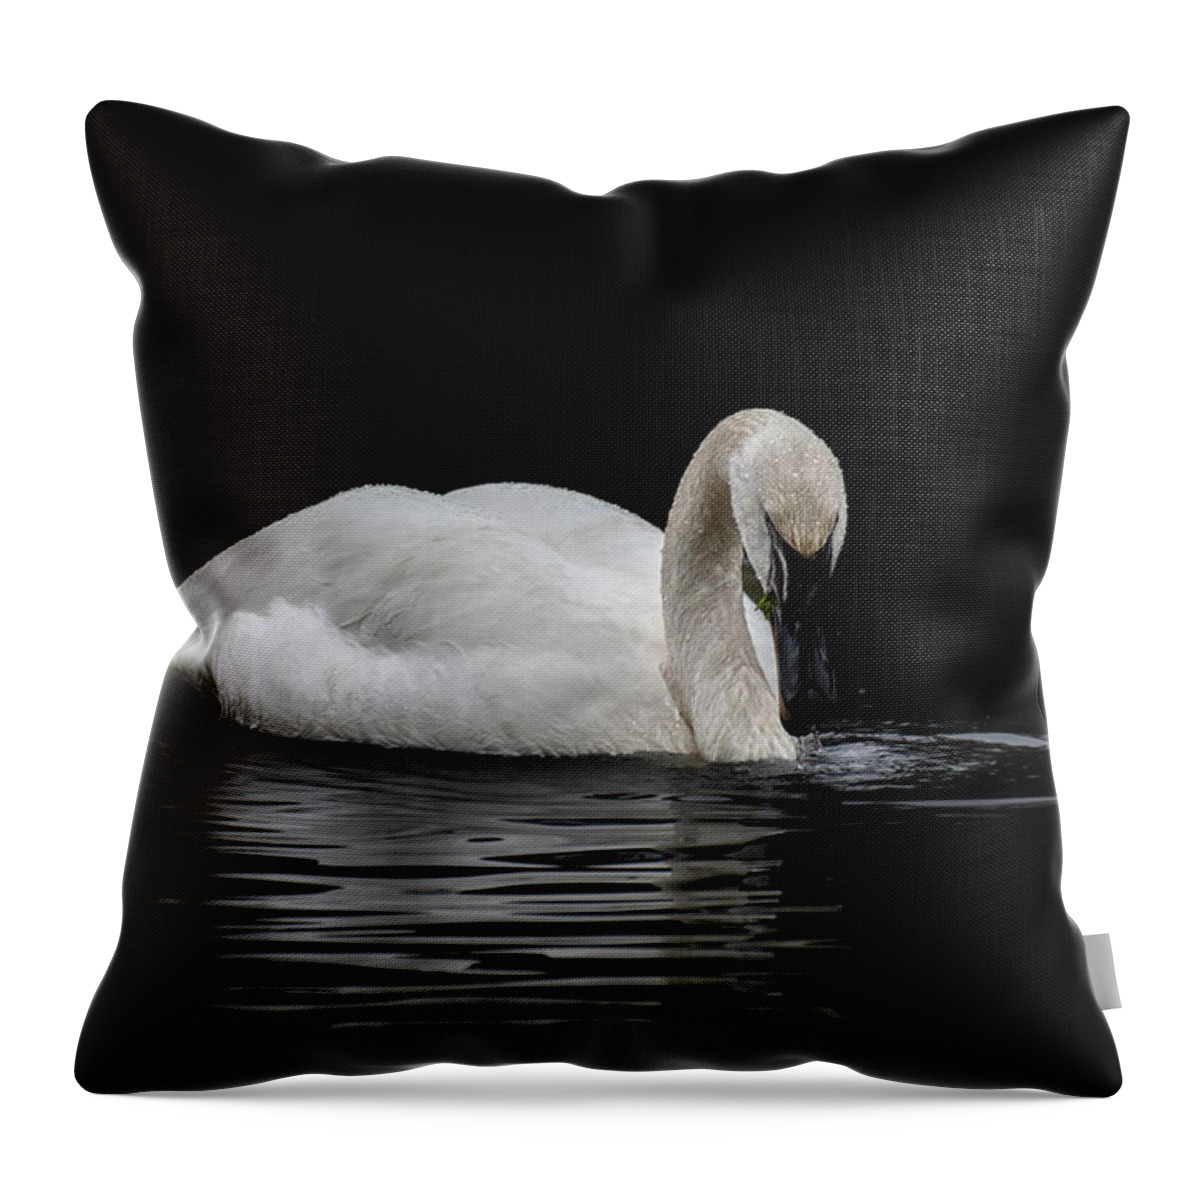 Swan Throw Pillow featuring the photograph Swan by Jerry Cahill